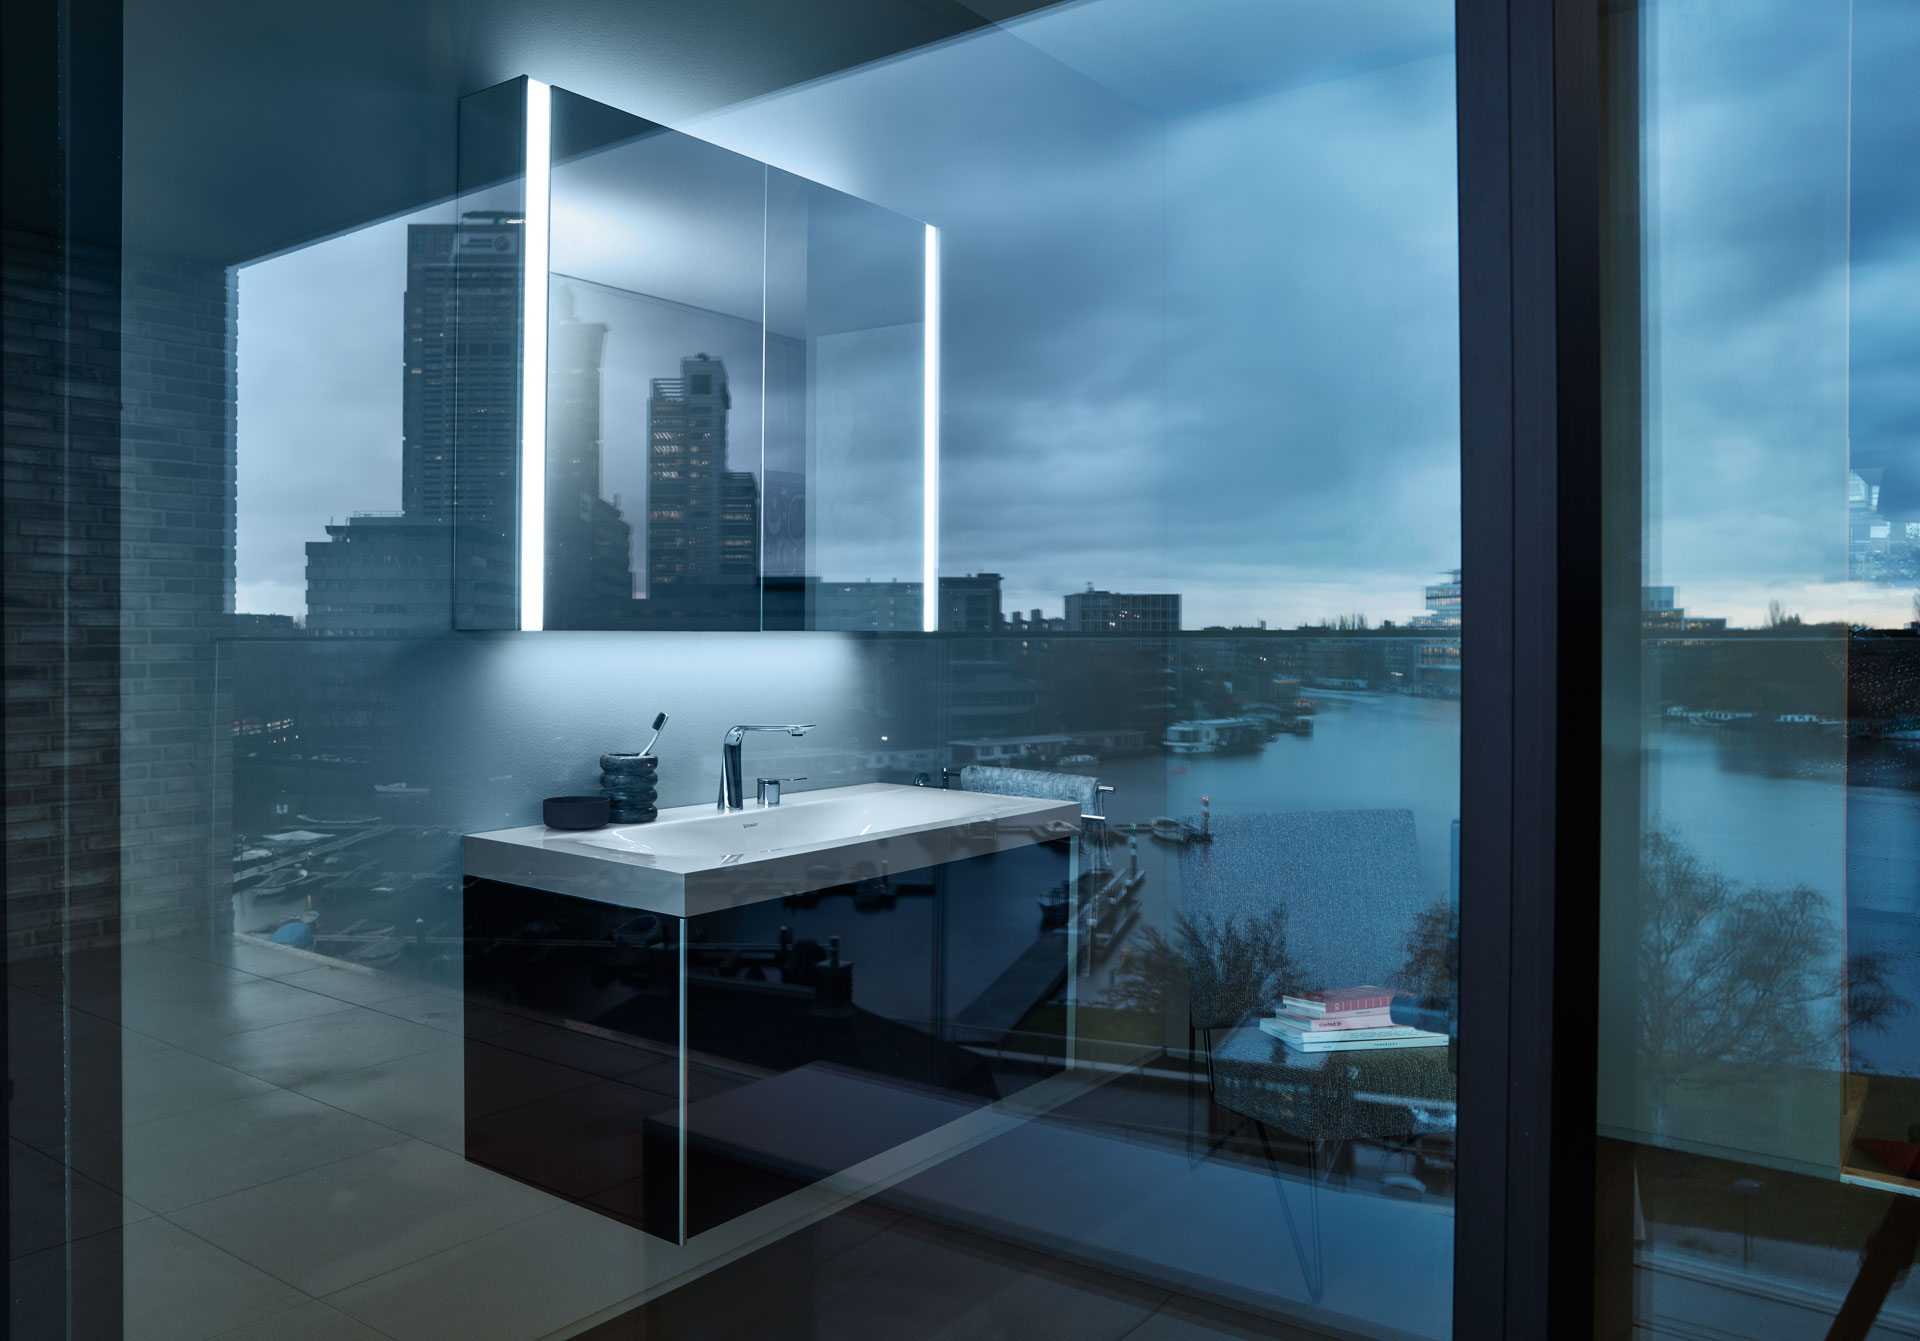 Bathroom with view and Xviu mirror cabinet
